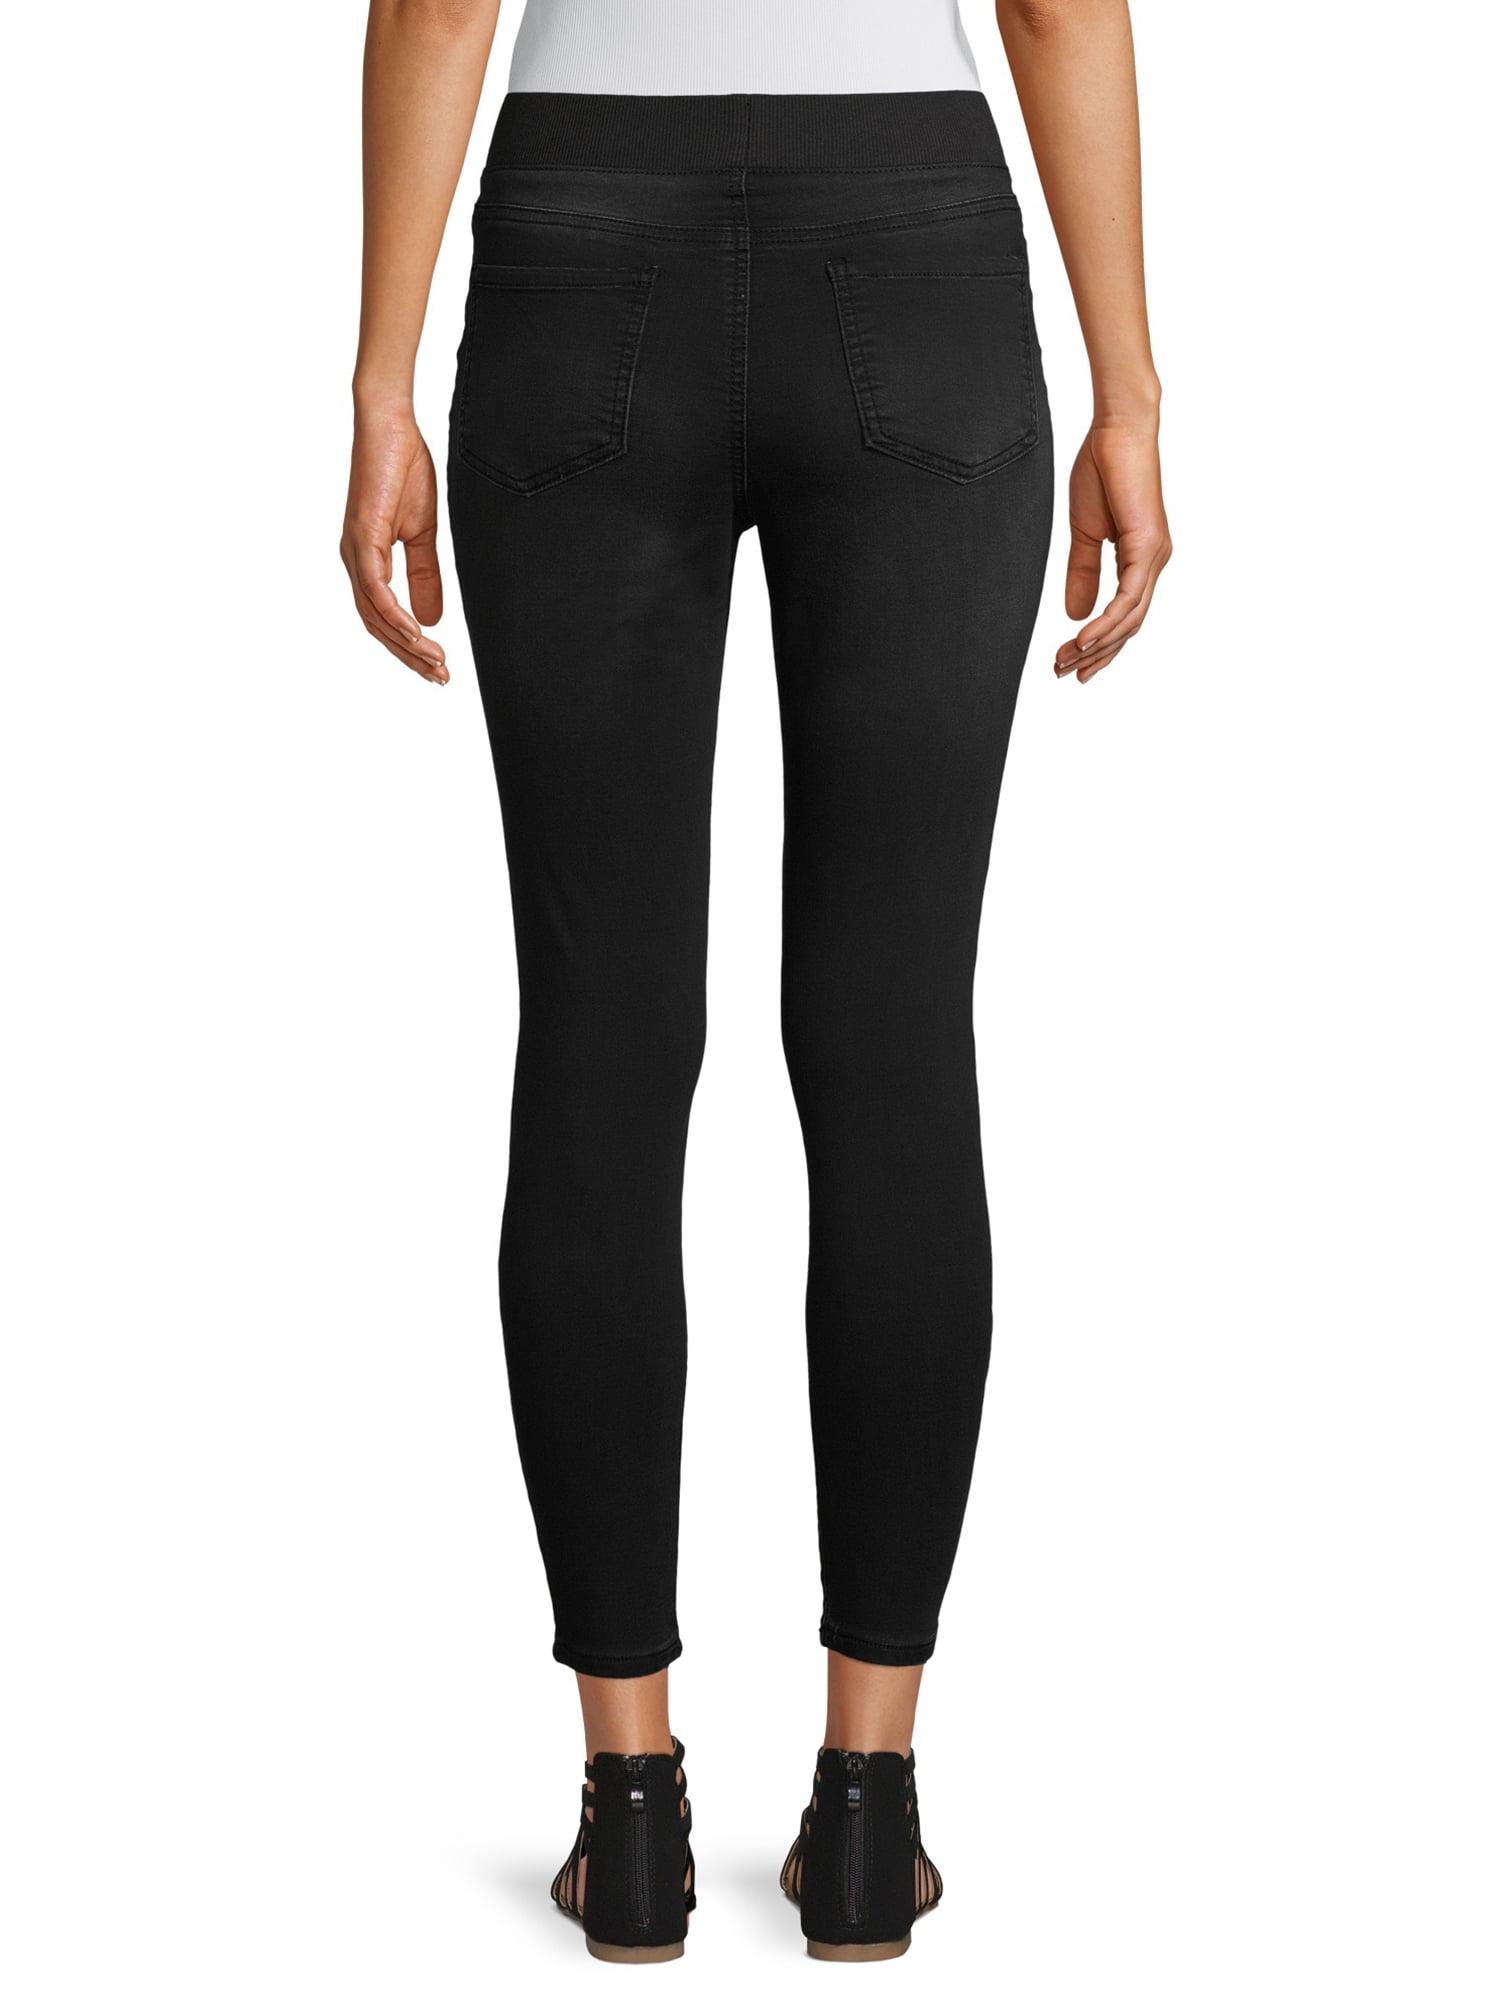 Top 7 Best workout leggings for women of 2022 → Reviewed & Ranked